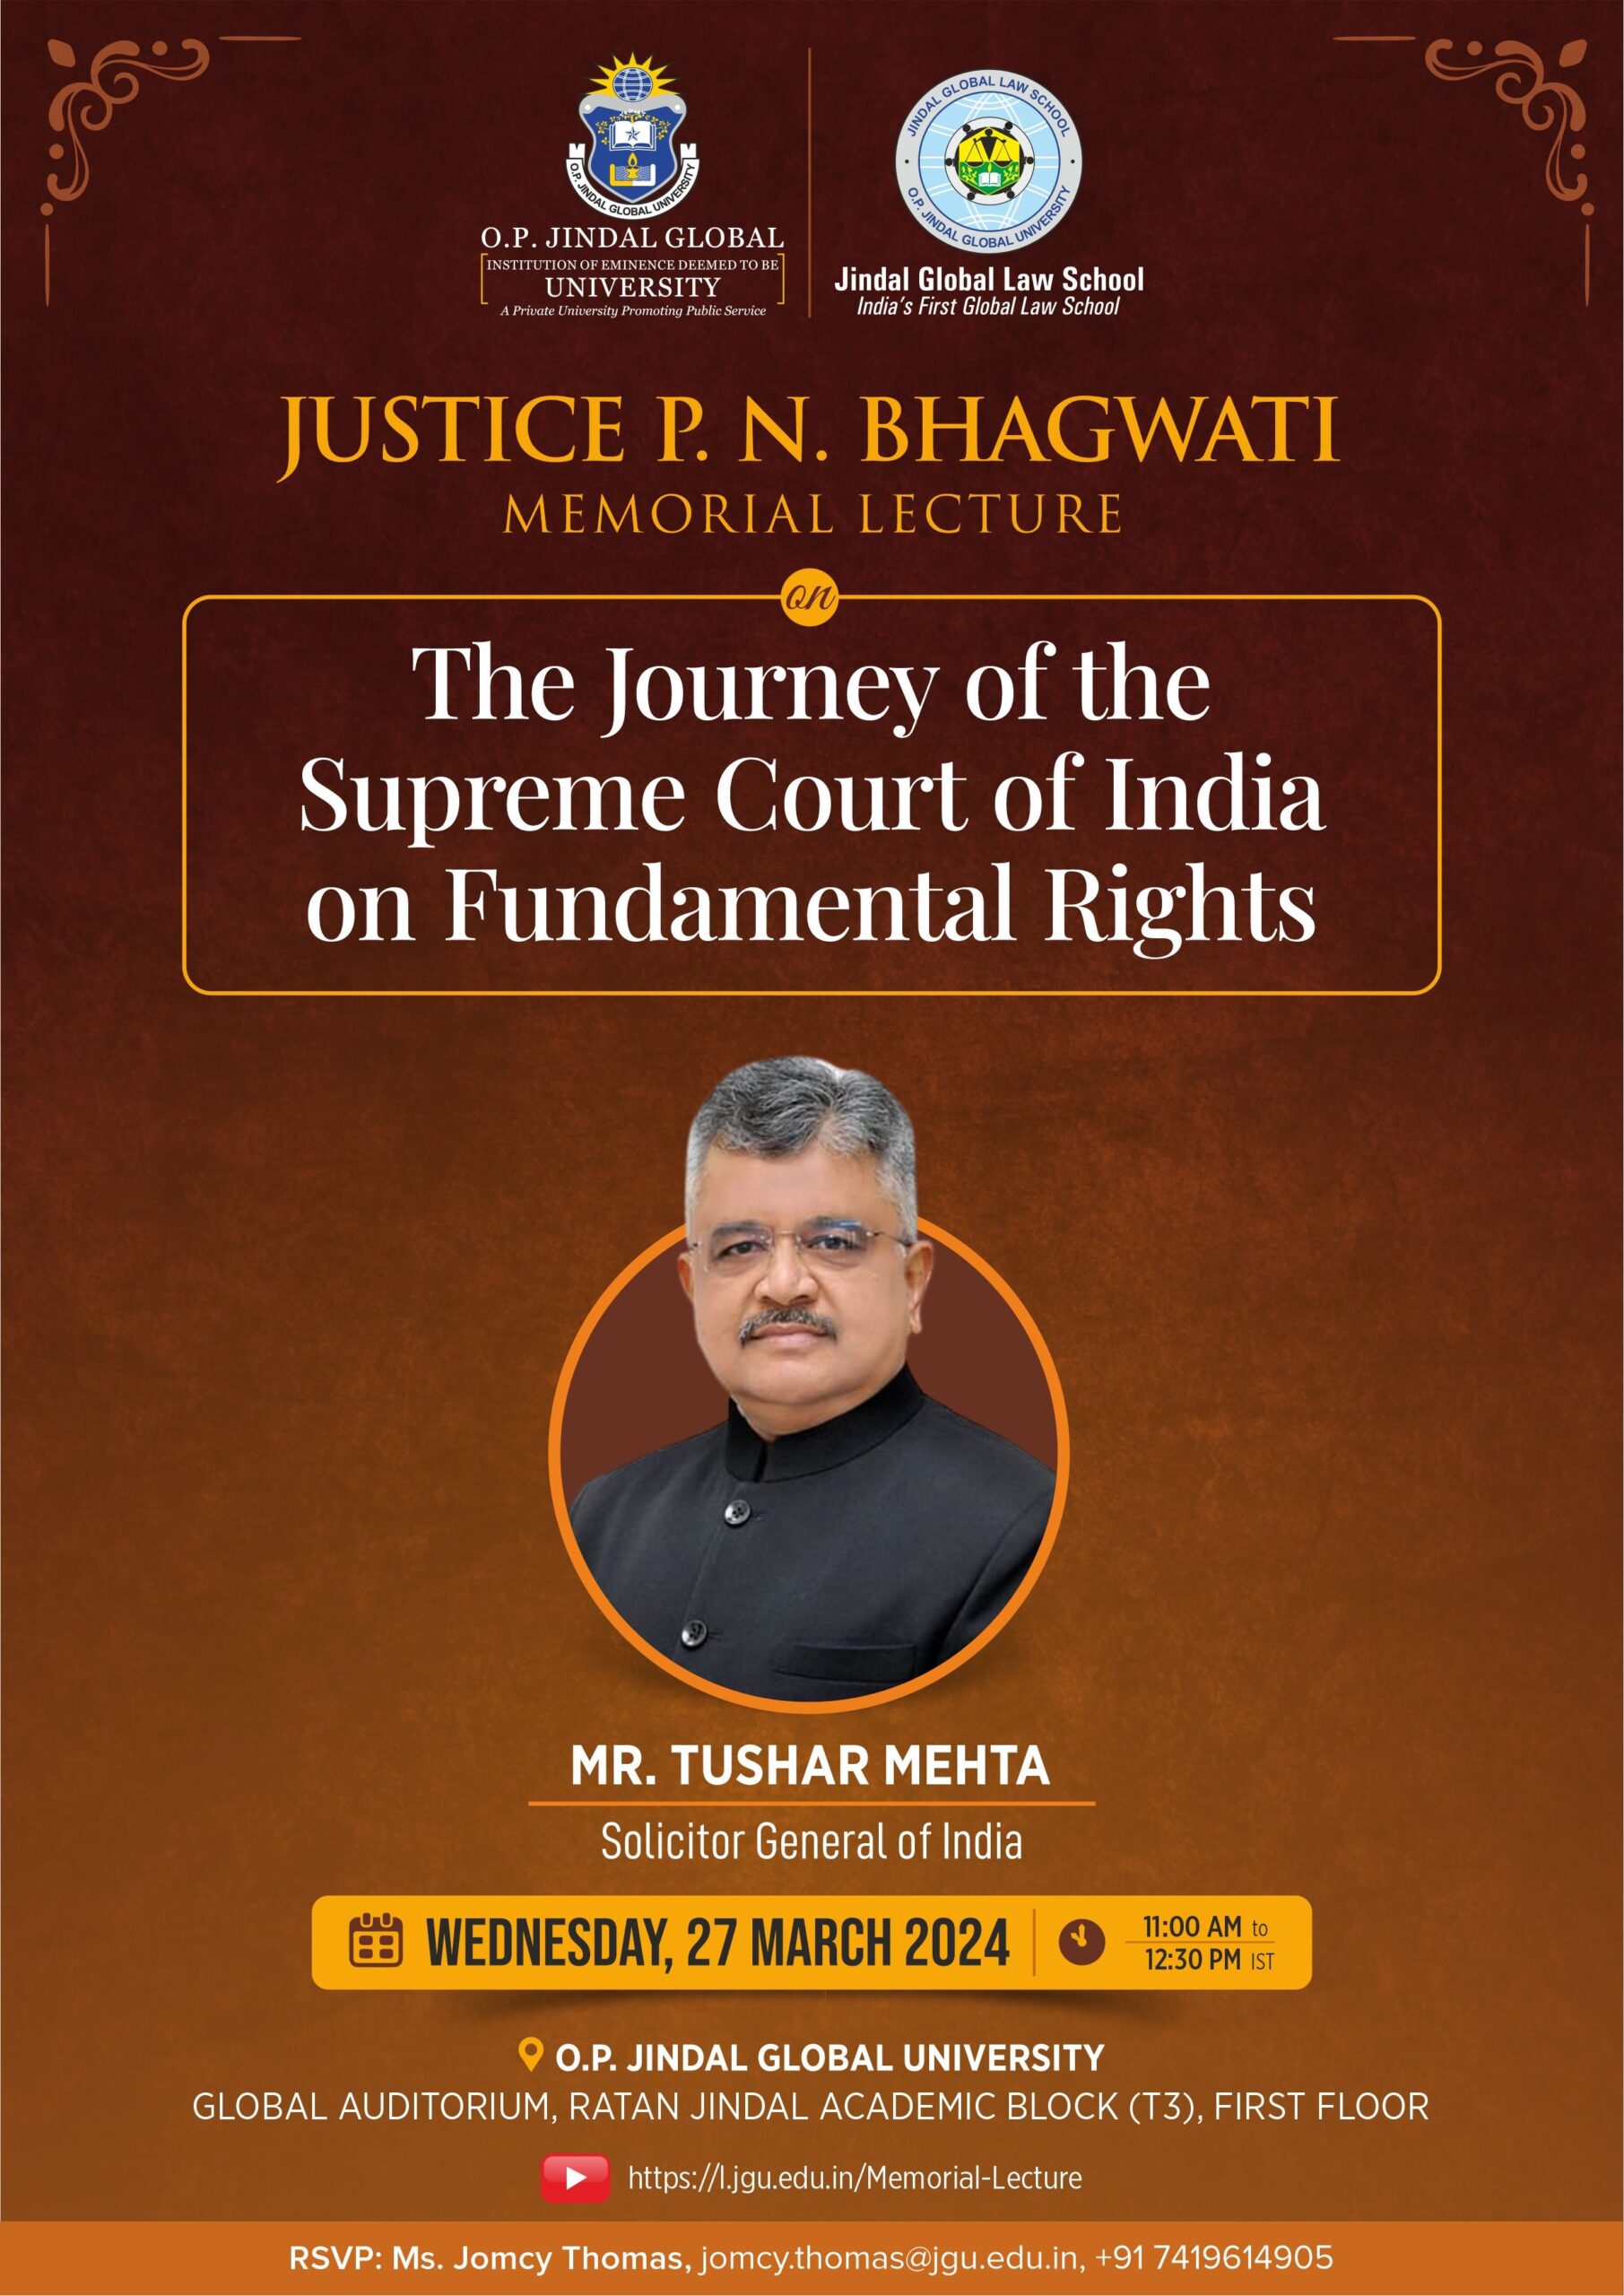 JUSTICE P. N. BHAGWATI MEMORIAL LECTURE on The Journey of the Supreme Court of India on Fundamental Rights